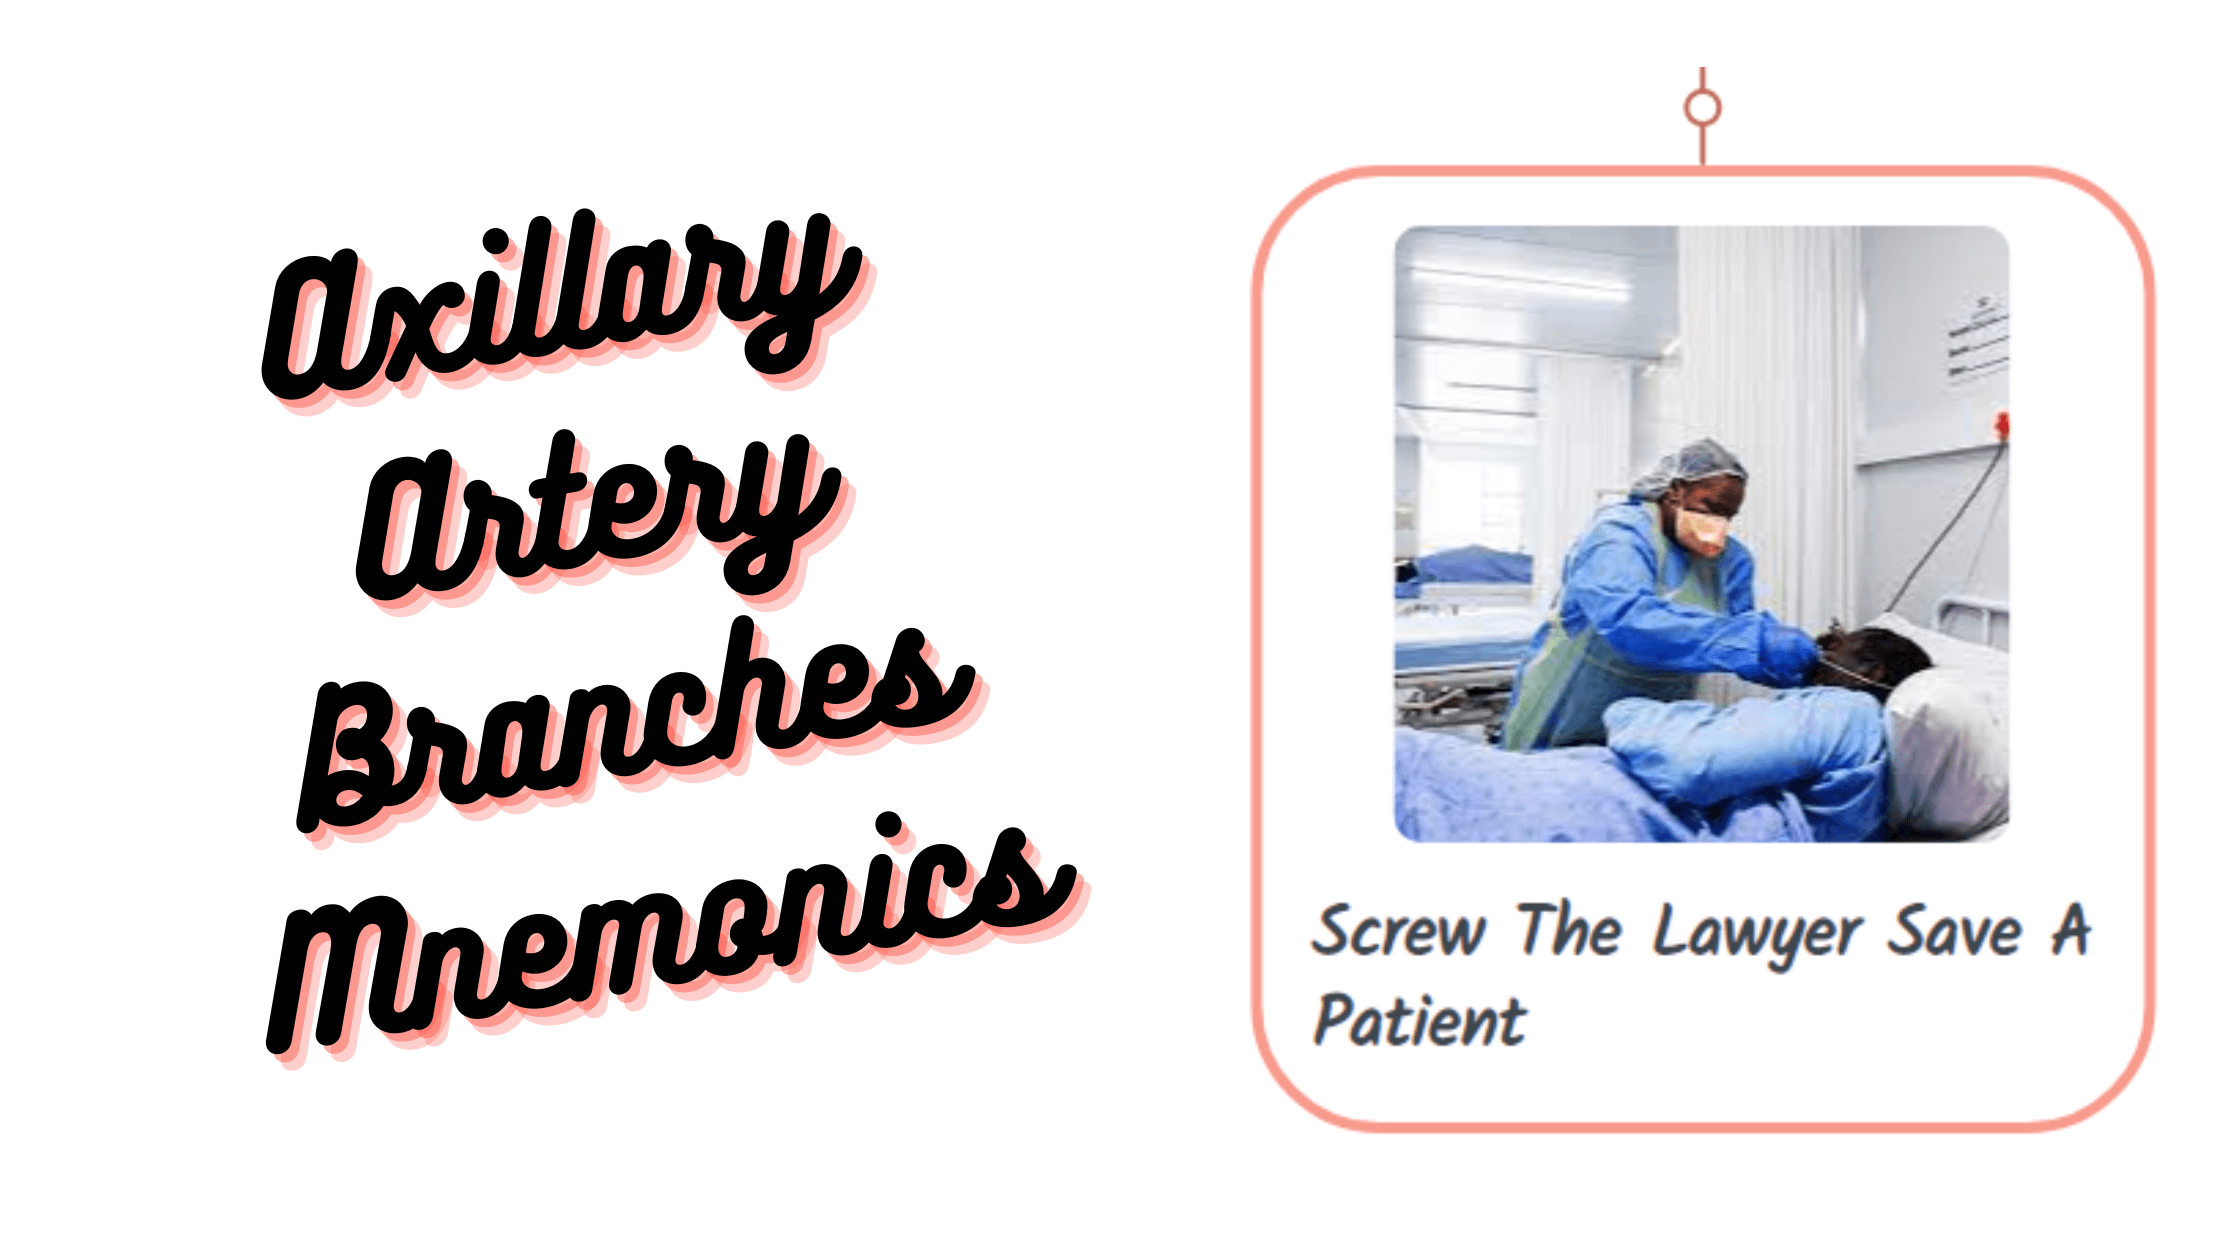 You are currently viewing [Very Cool] Mnemonic: Axillary artery branches